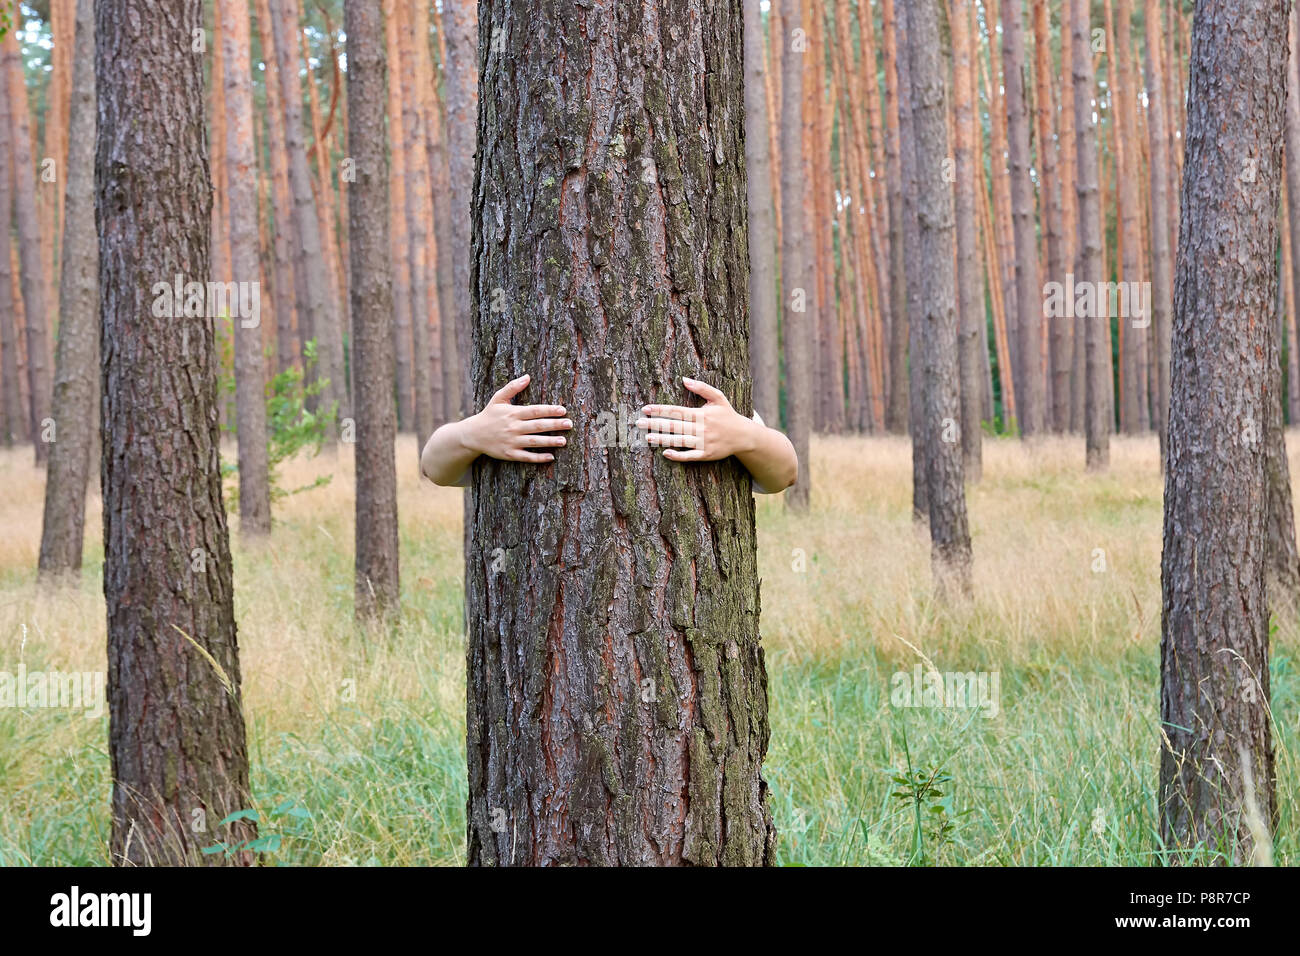 A young woman hugging a tree trunk in a forest Stock Photo